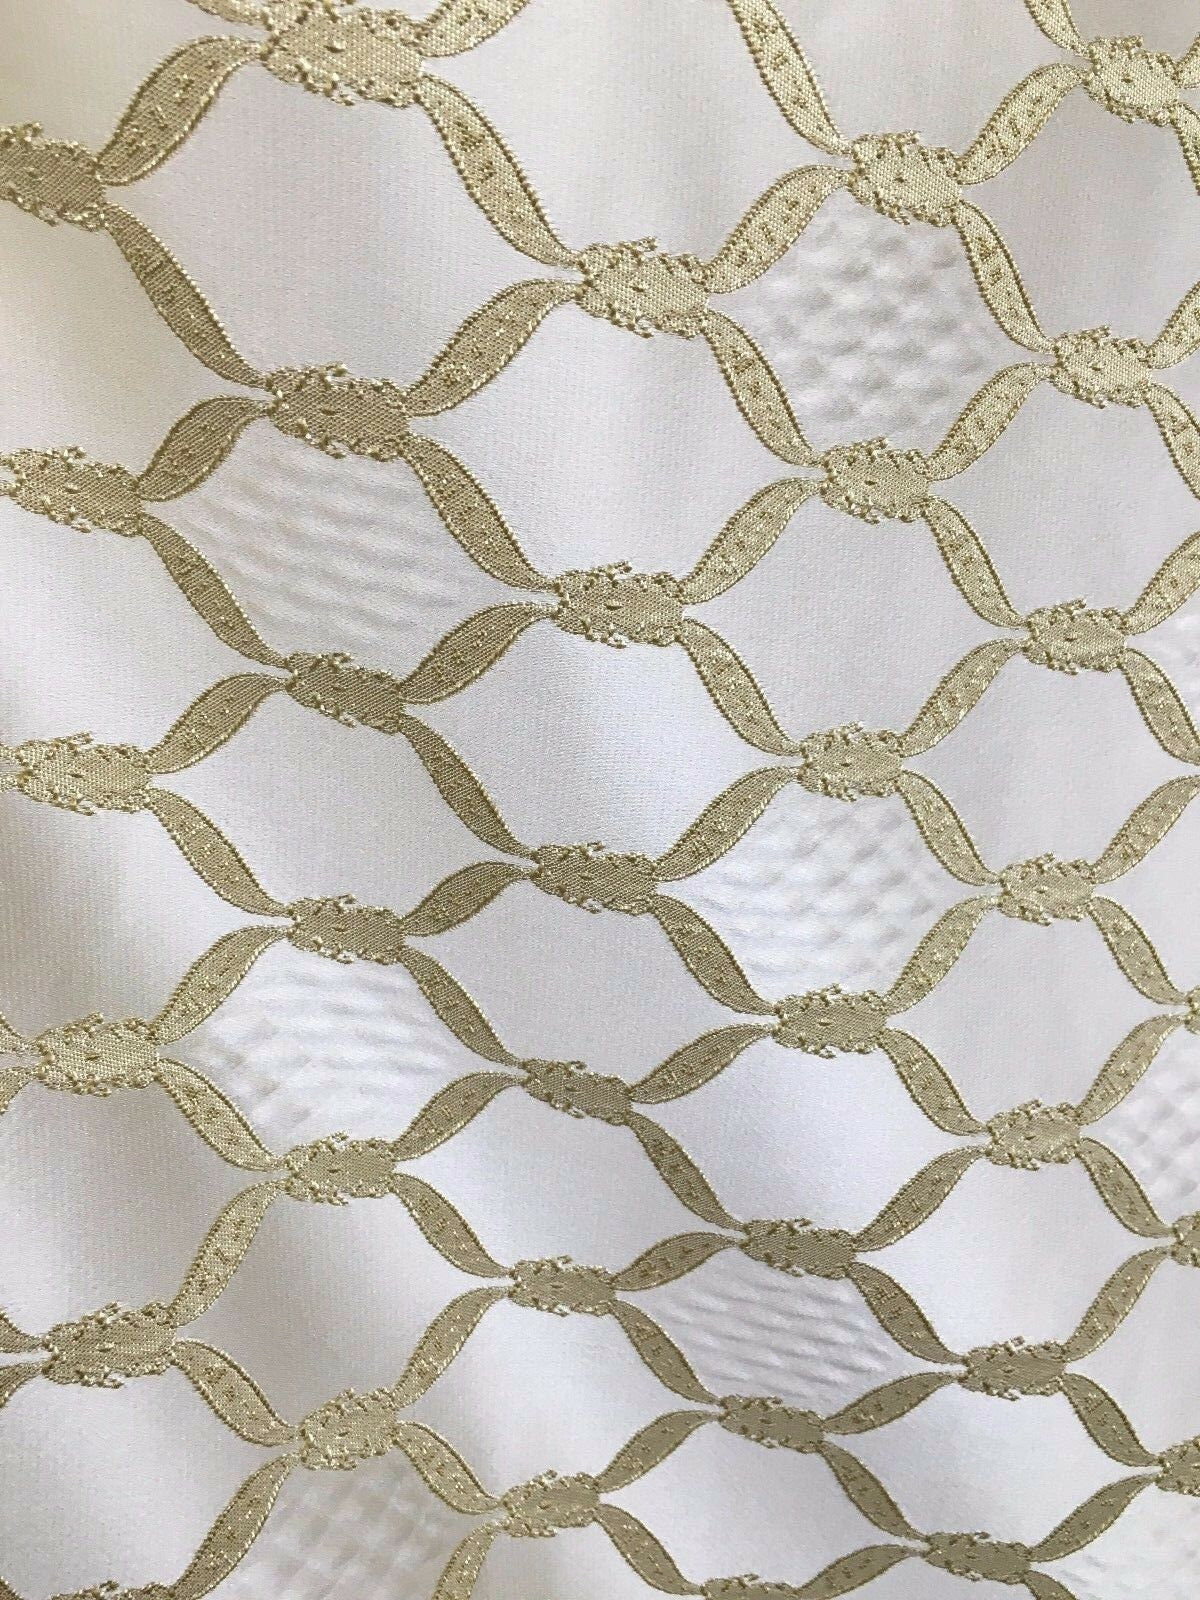 LIGHT GOLD Diamond Brocade Upholstery Drapery Fabric (54 in.) Sold By The Yard